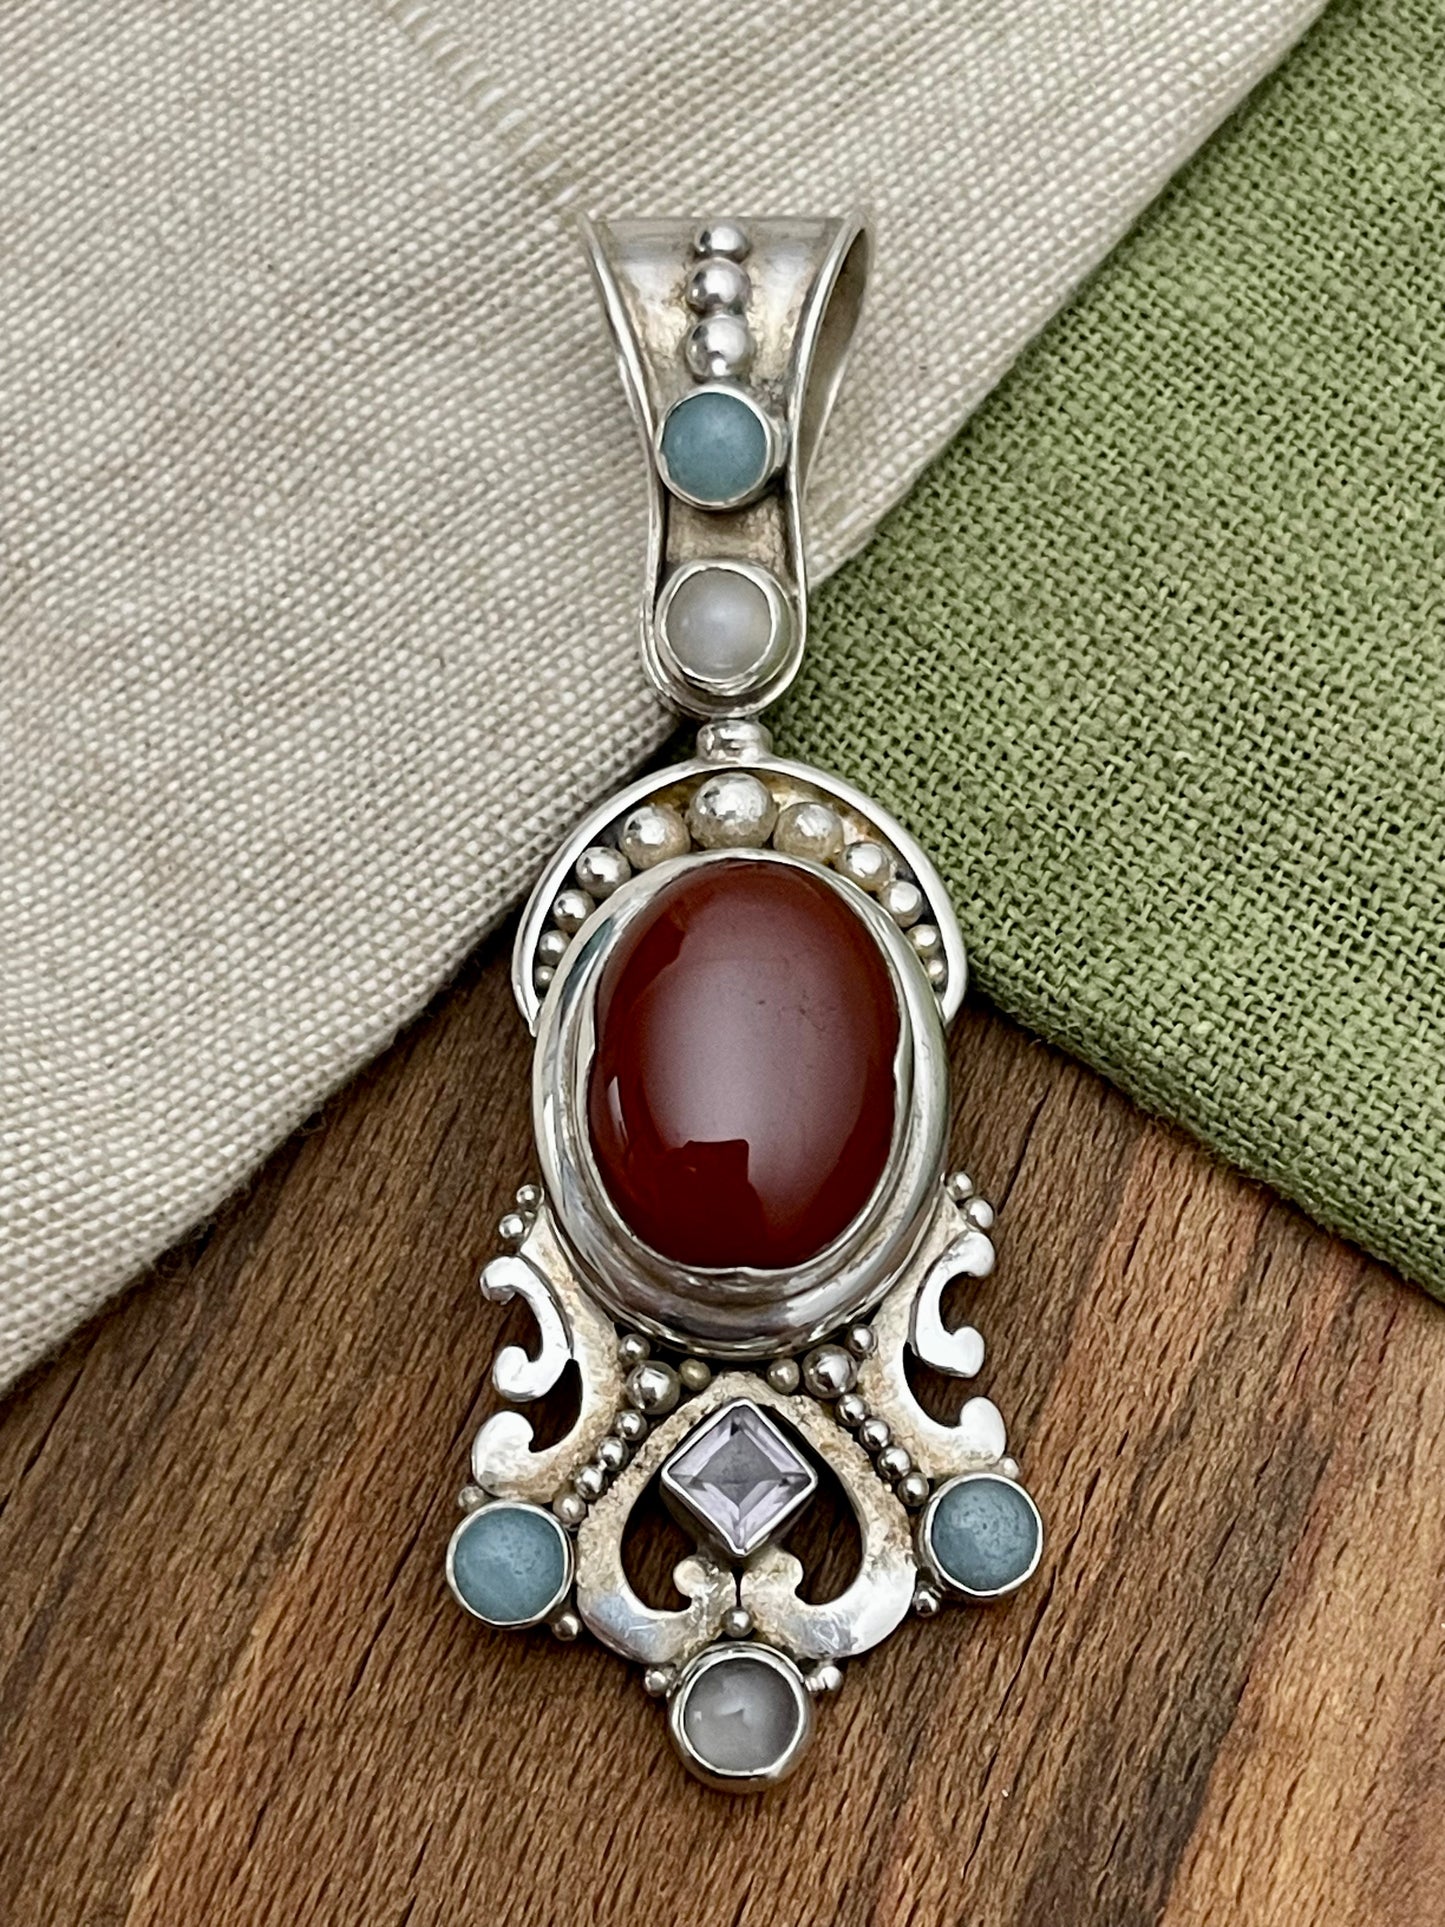 Red Blood Amber and Amethyst Pendant Solid Sterling 925 Silver Vintage Jewelry